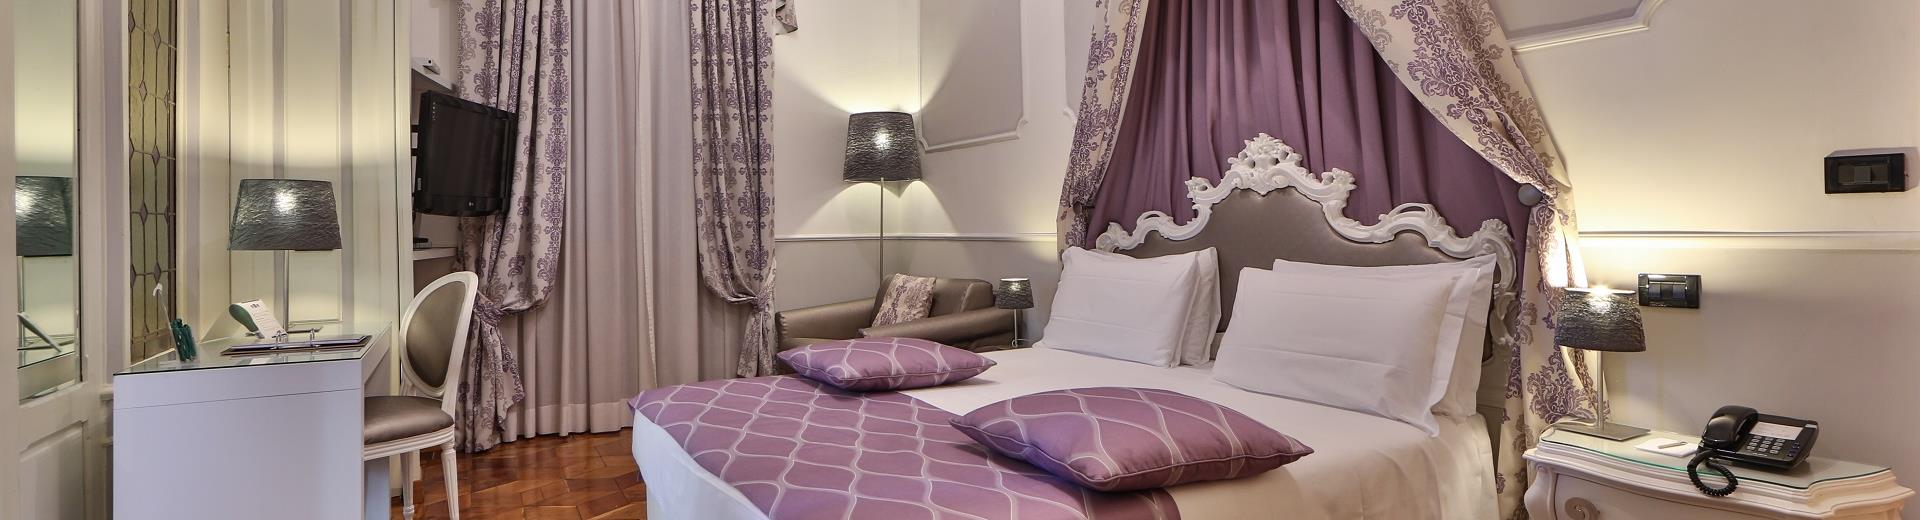 Rest, comfort and elegance in the deluxe rooms of our 4-star hotel